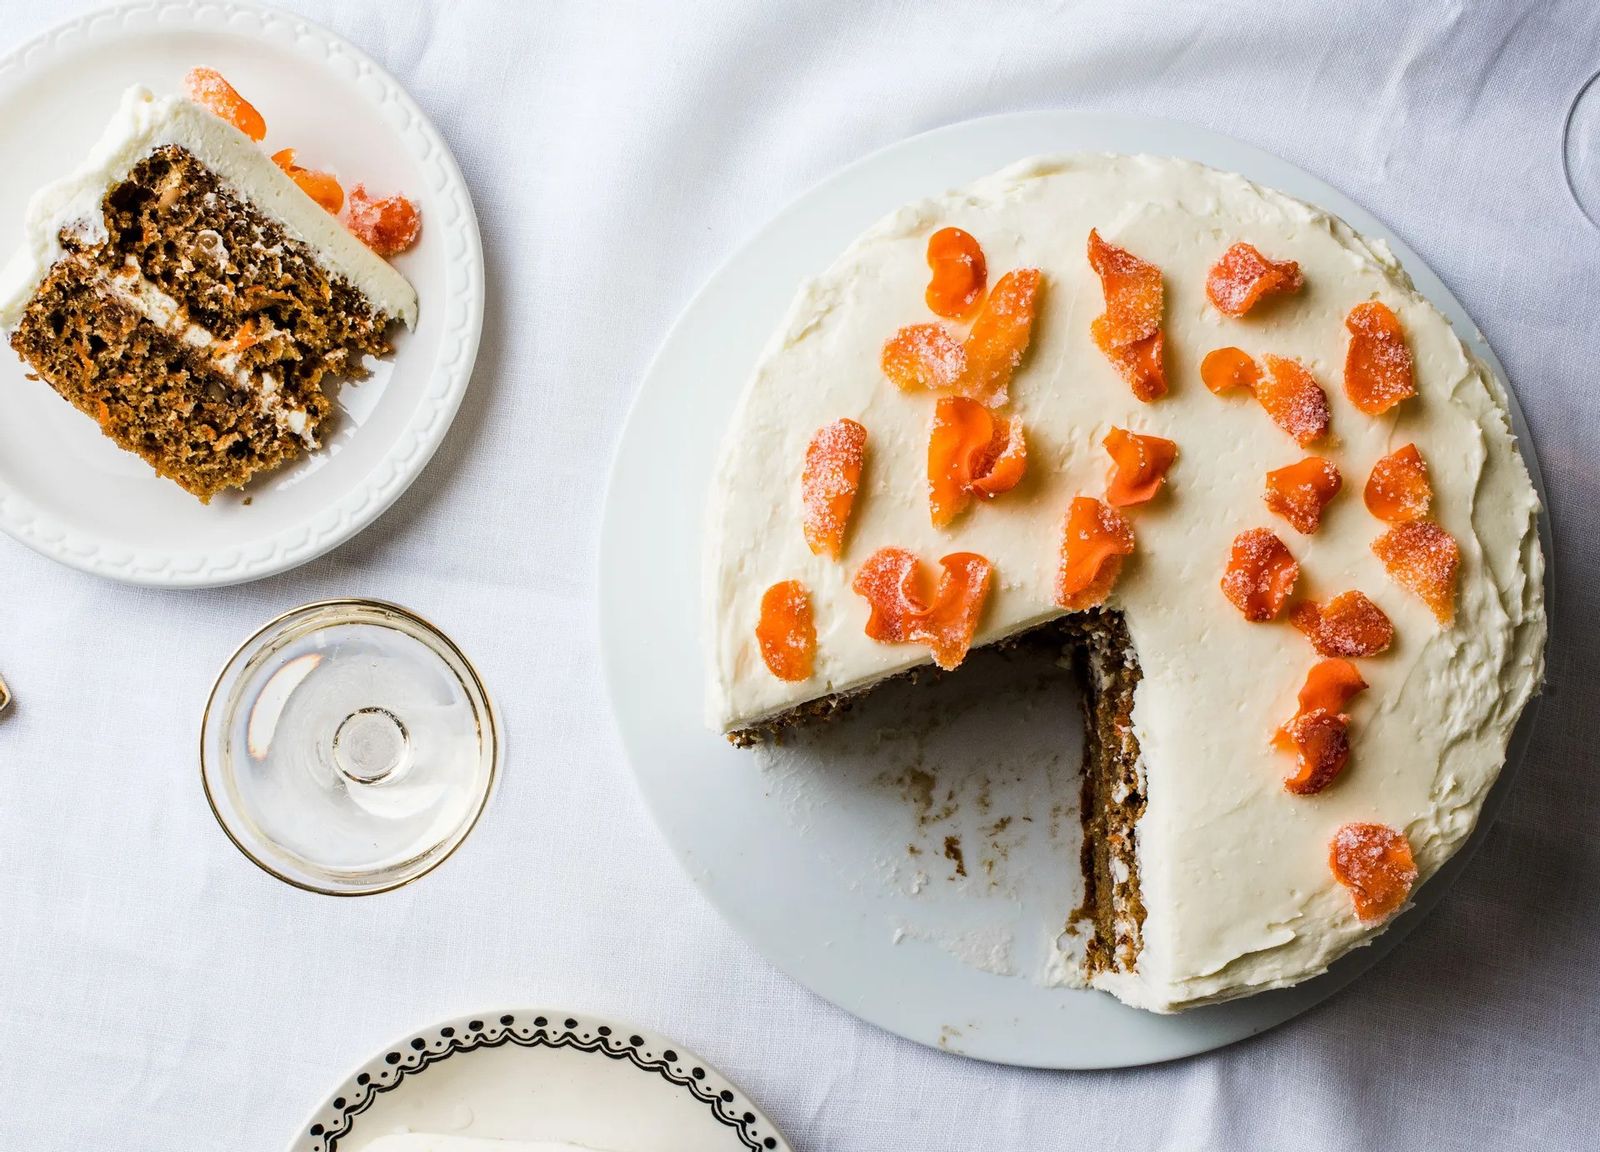 Celebrate Easter with Our Favorite Carrot Cake Recipe!